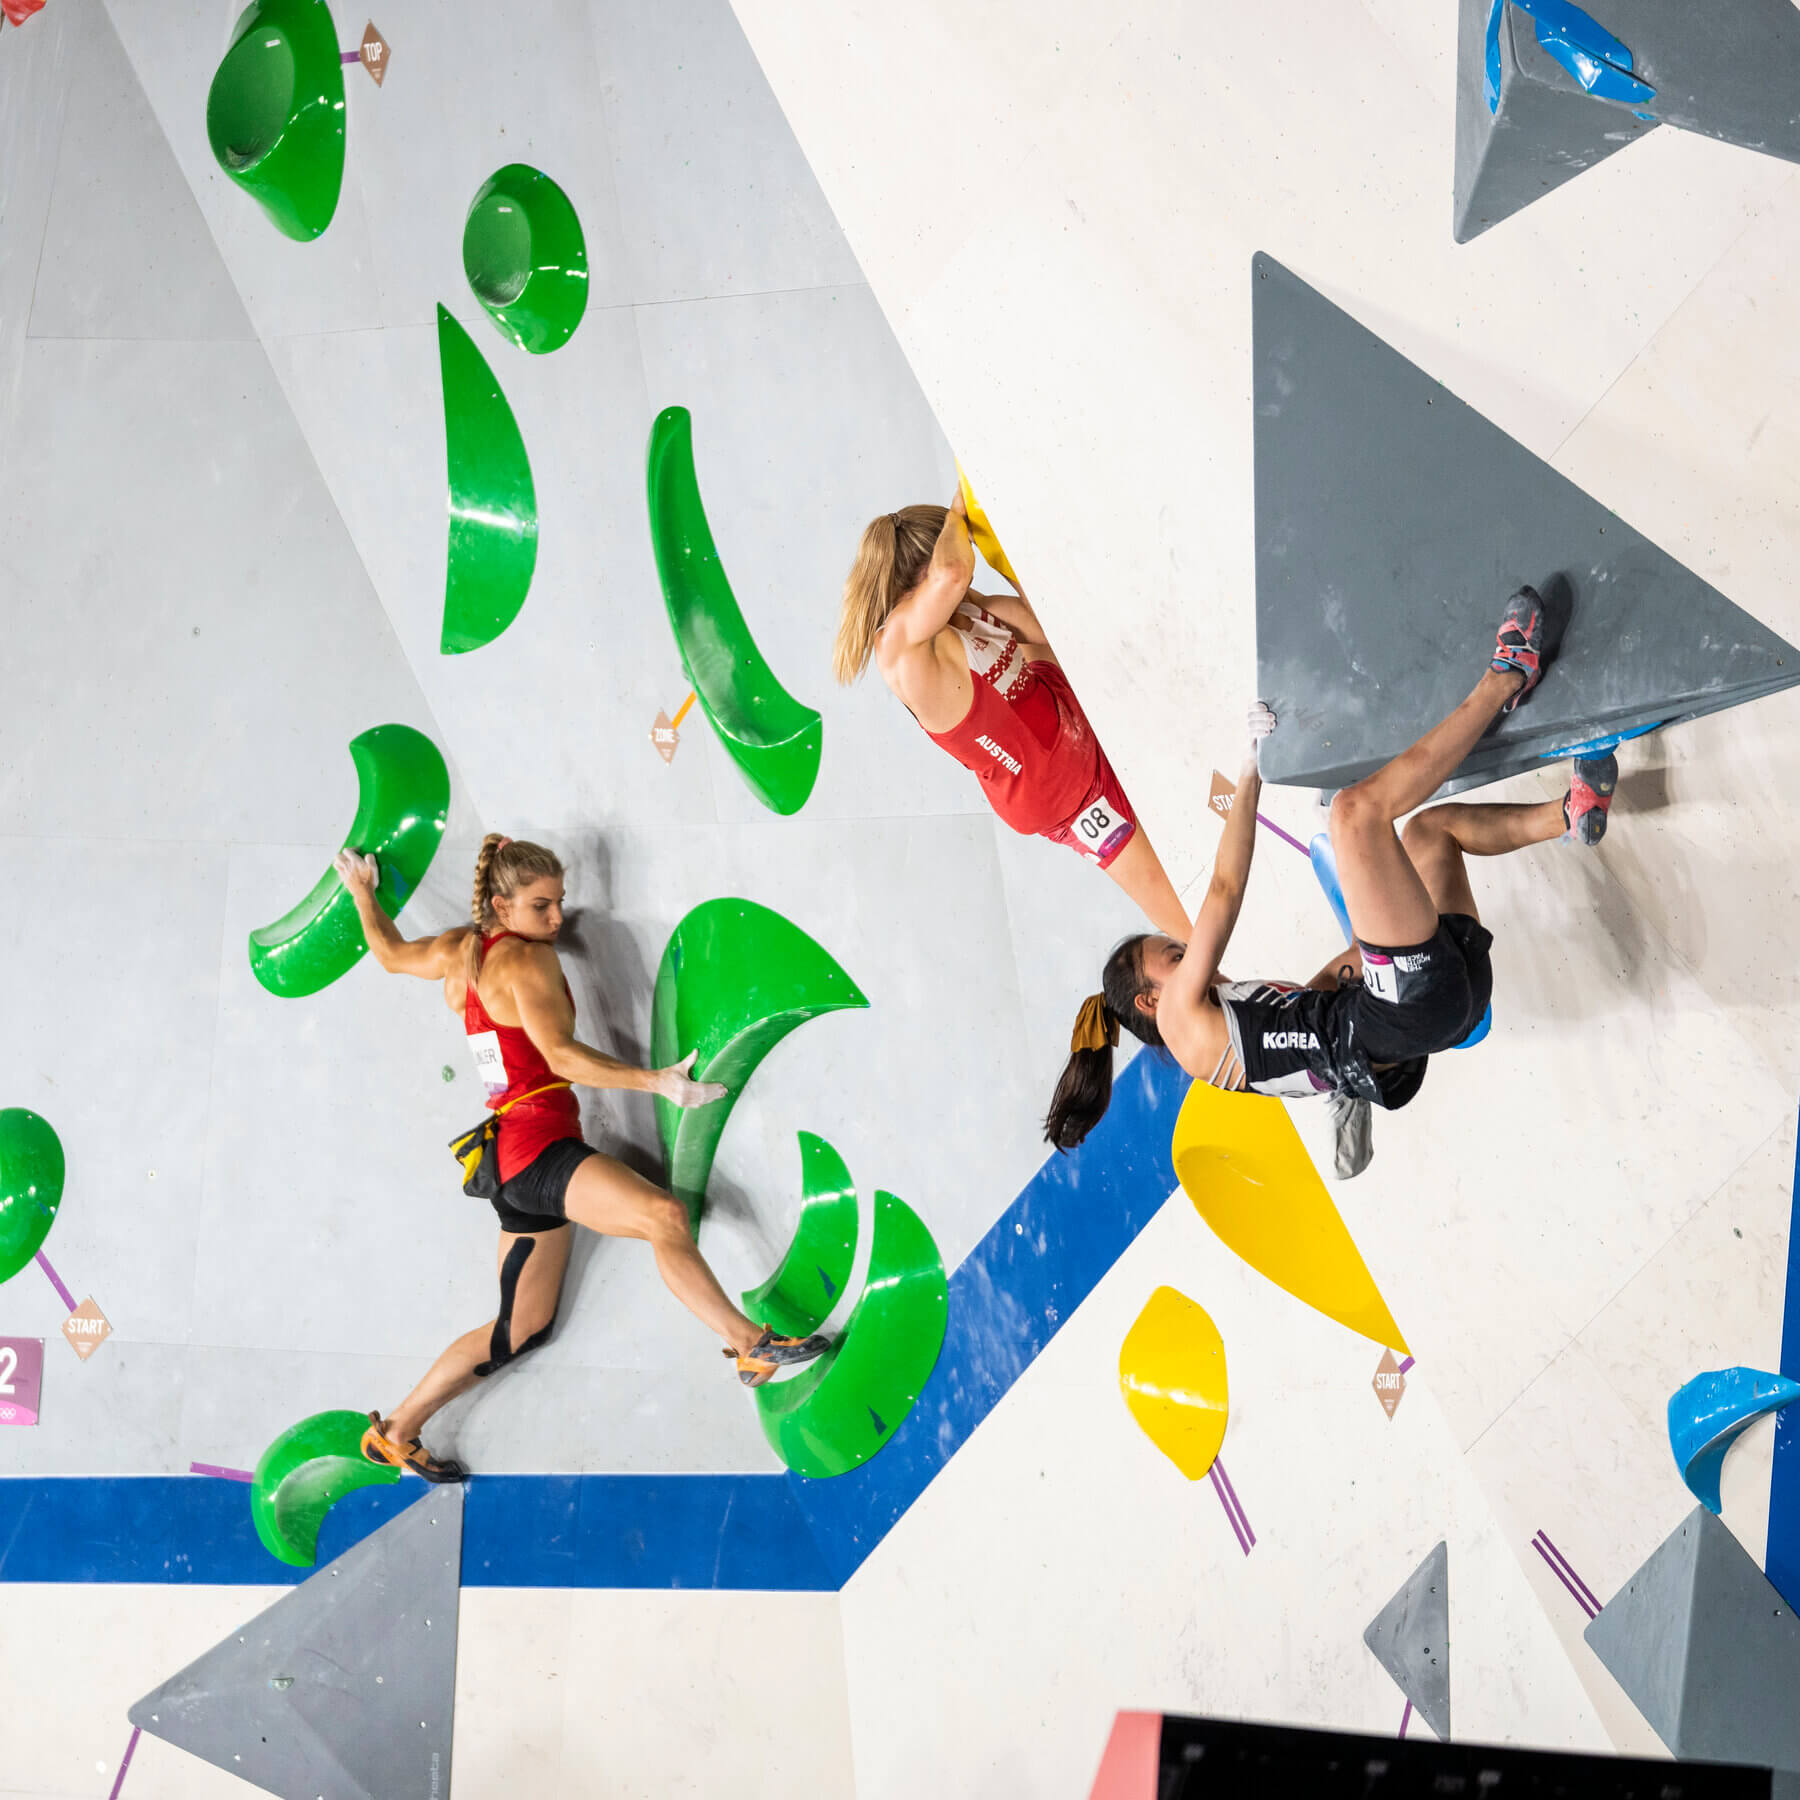 A women’s sport climbing event at the 2020 Tokyo Olympics. (Doug Mills/The New York Times).